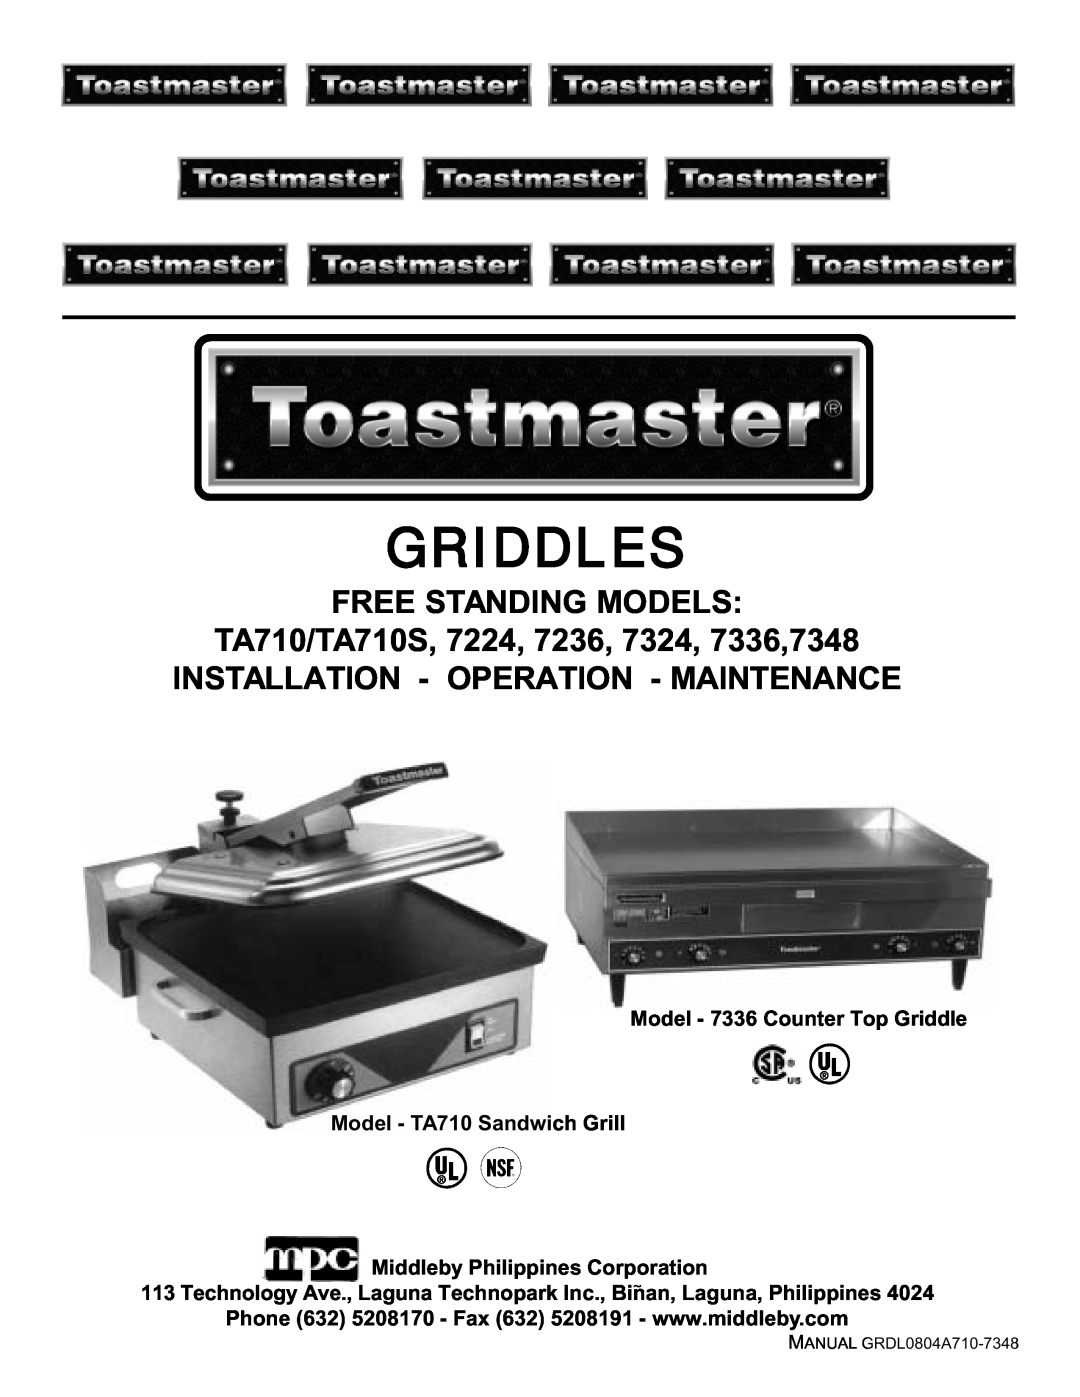 Toastmaster manual Griddles, FREE STANDING MODELS TA710/TA710S, 7224, 7236, 7324, 7336,7348 